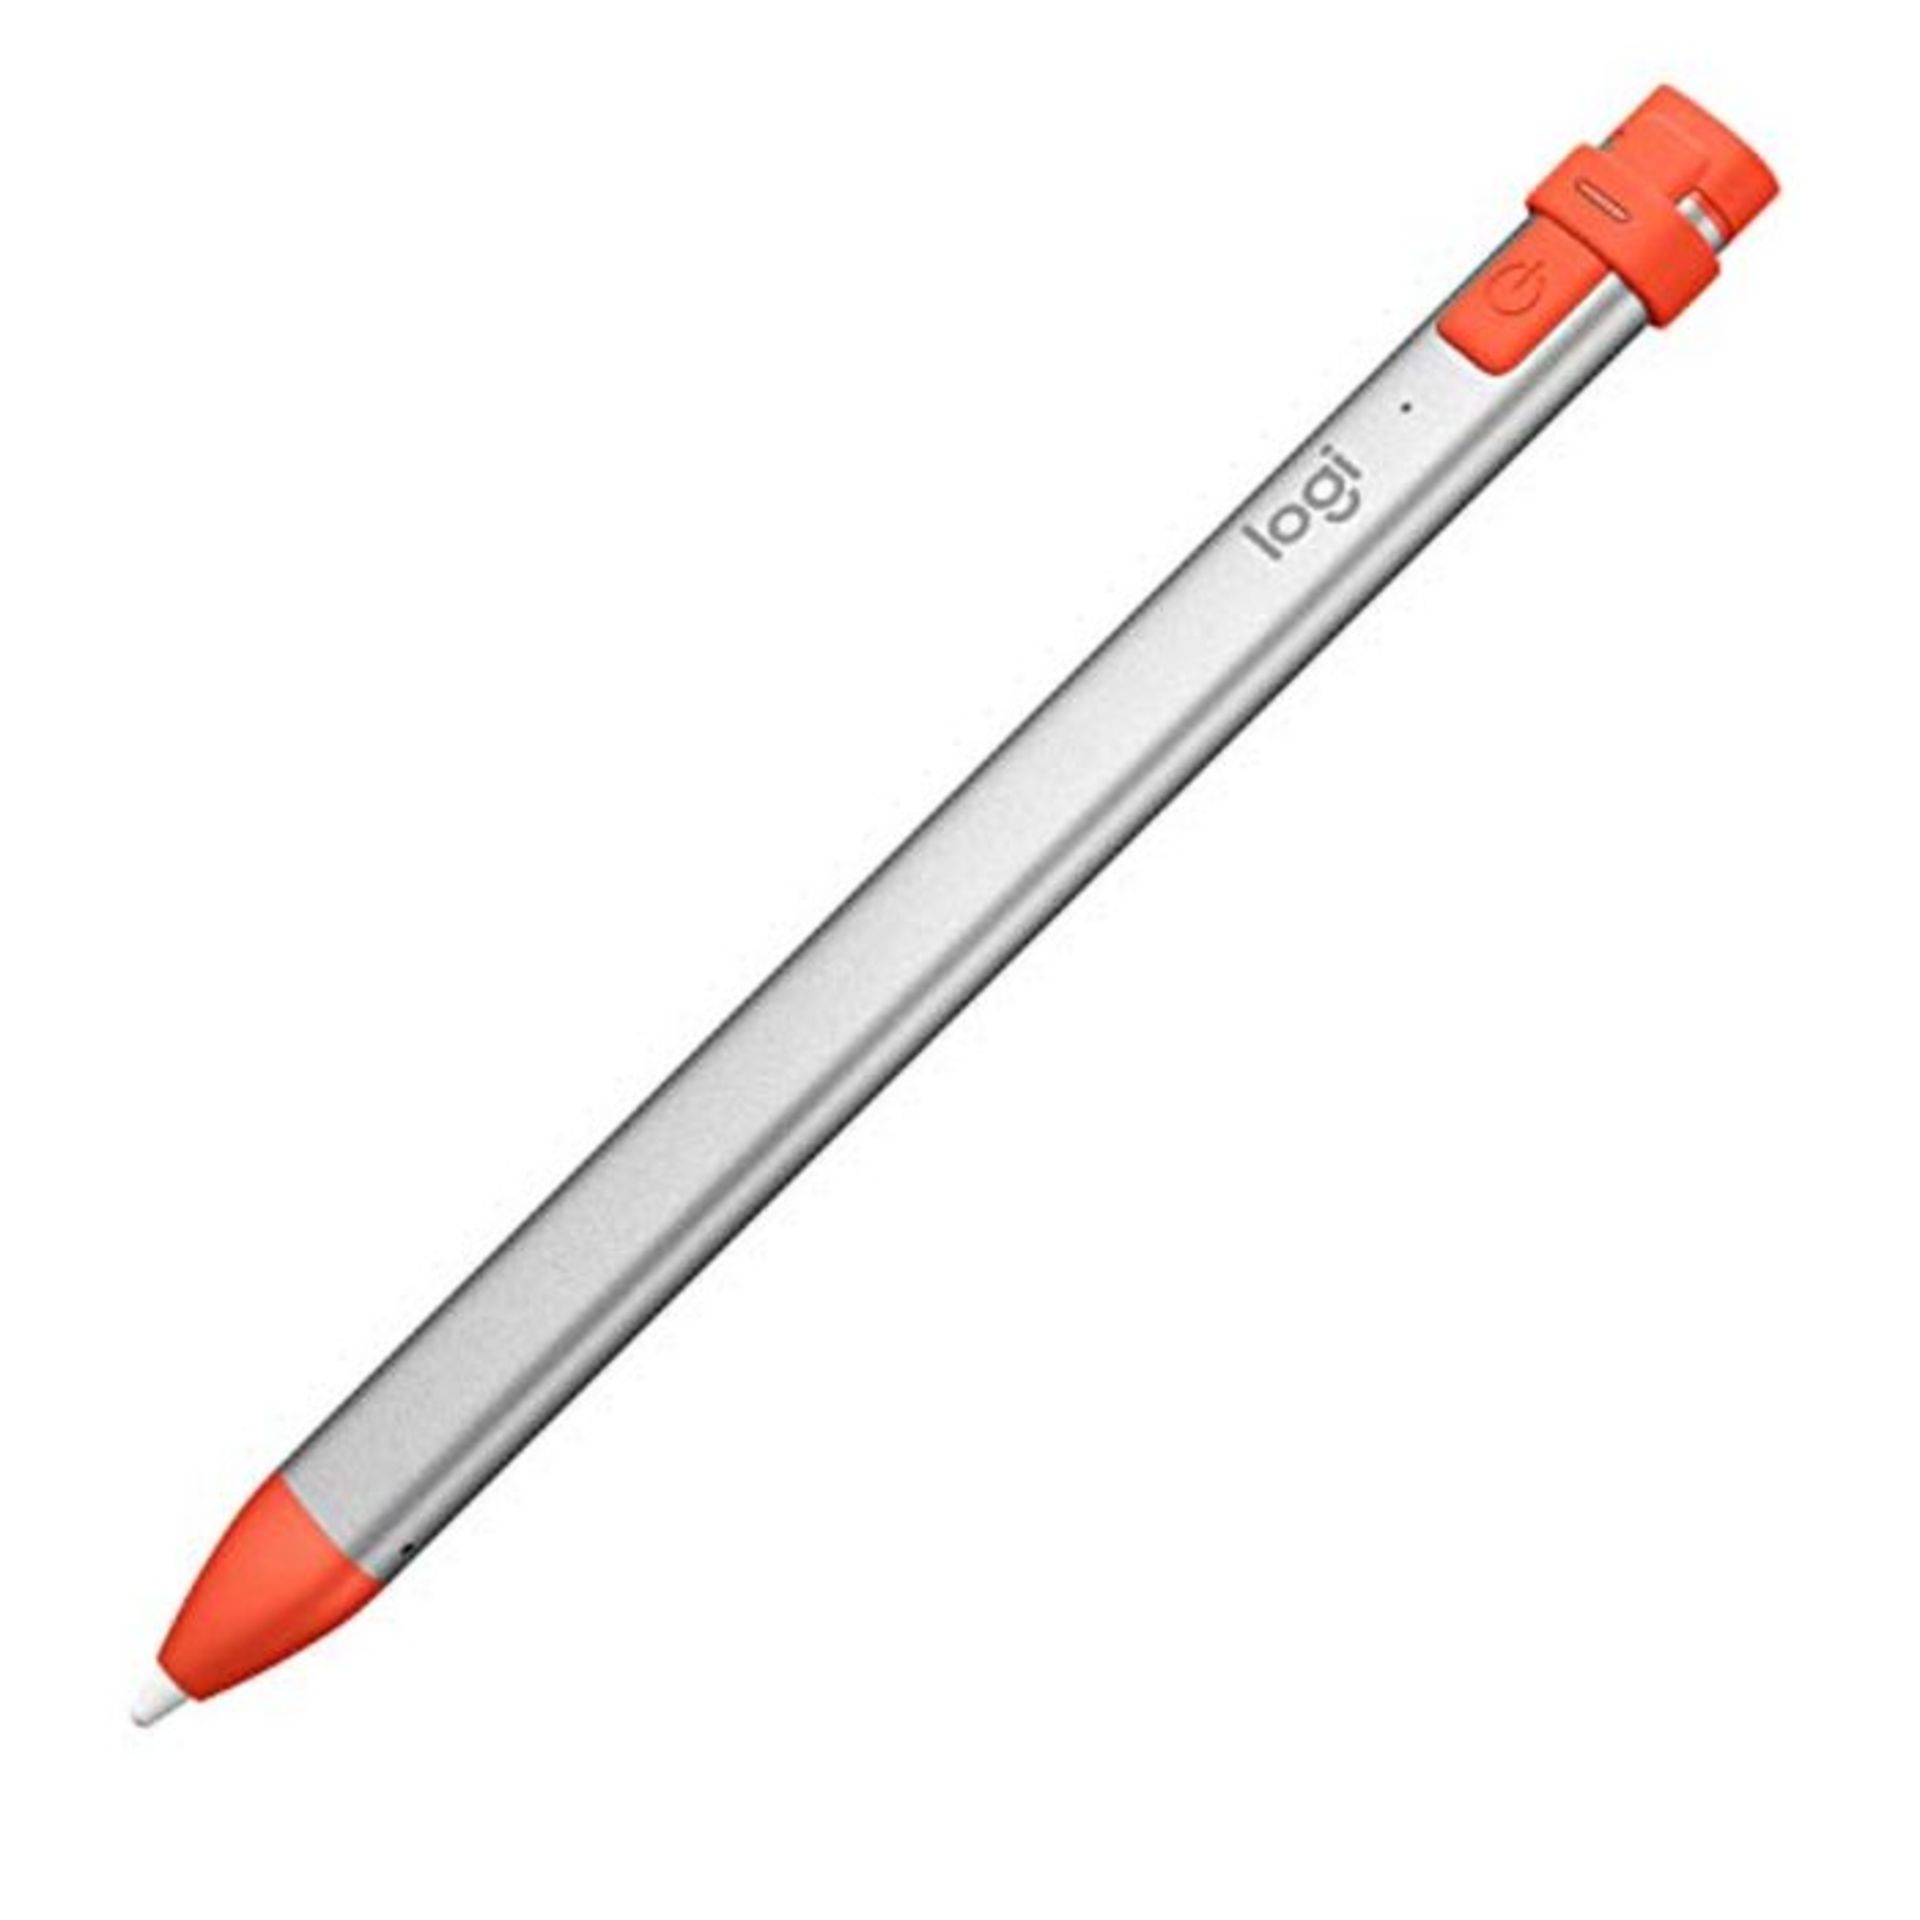 RRP £59.00 Logitech Crayon Digital Pencil For All iPads Released in 2019 or Later, iPad, iPad Pro